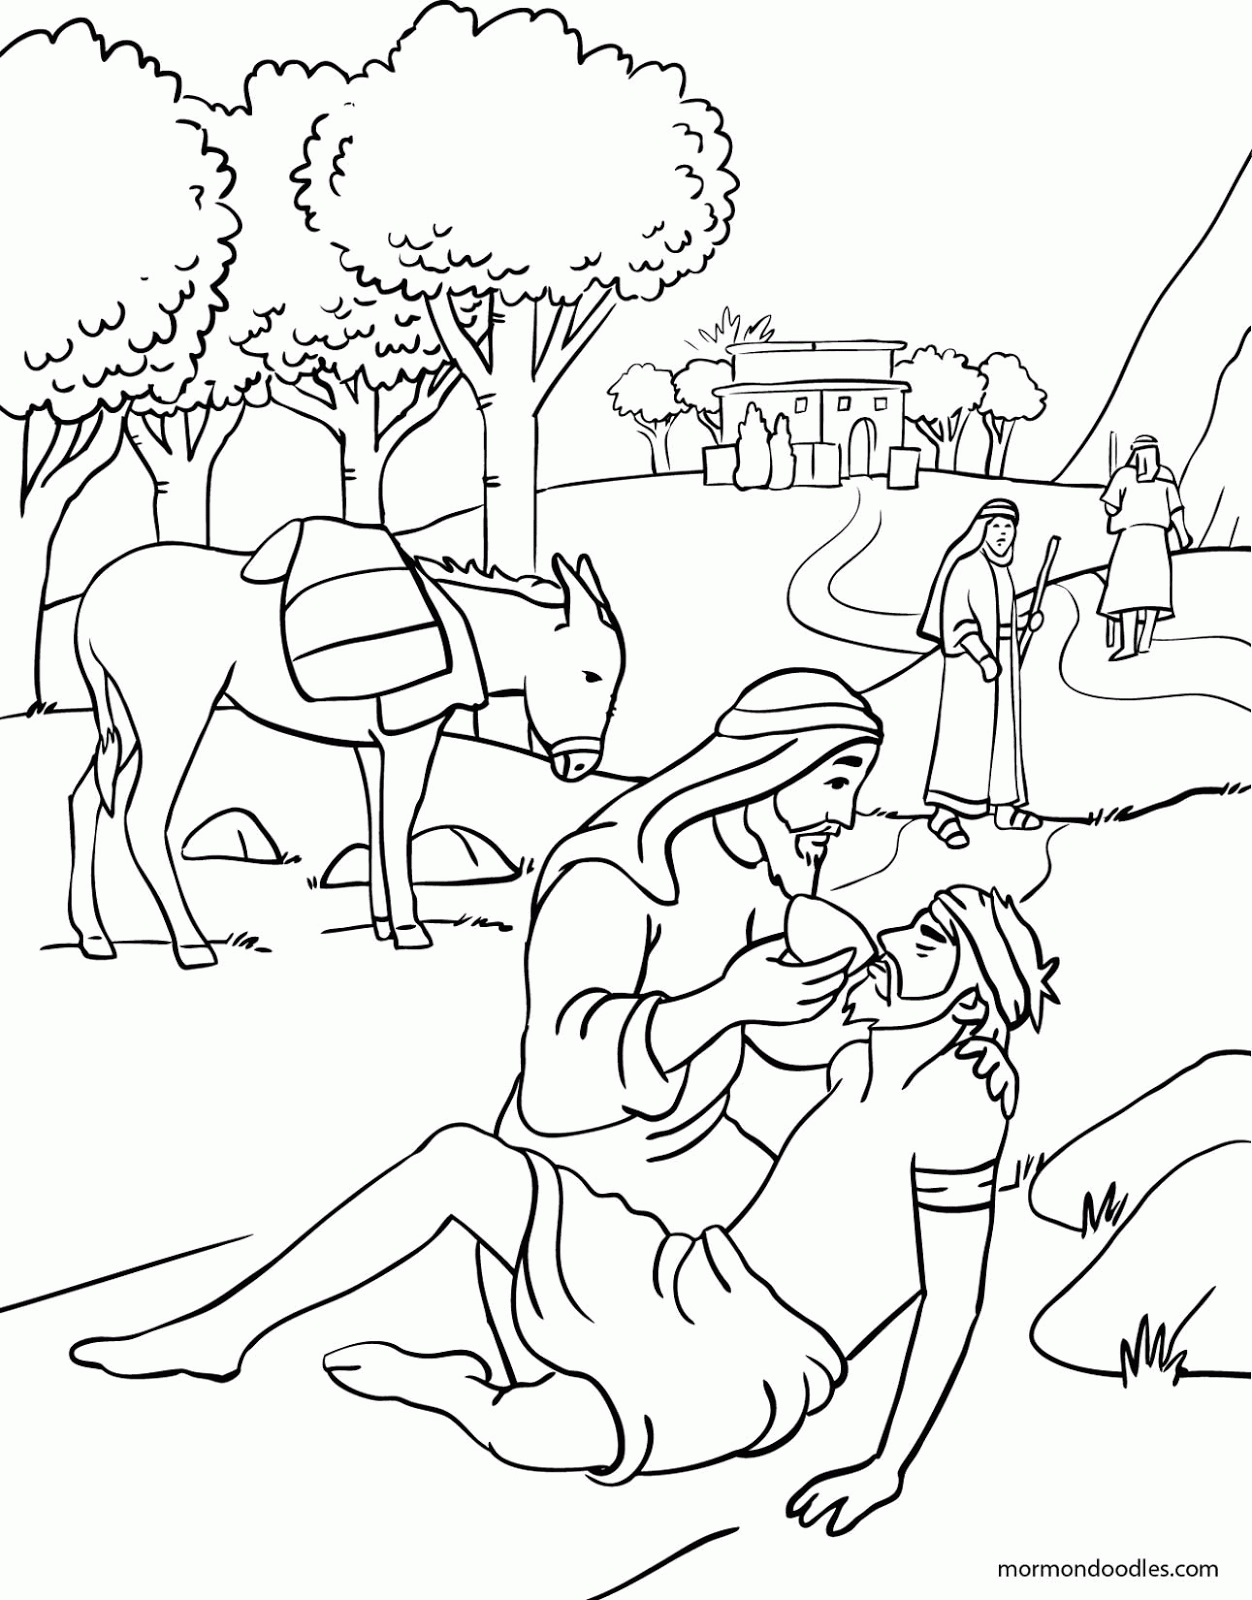 Good Samaritan Coloring Pages For Kids Coloring Home